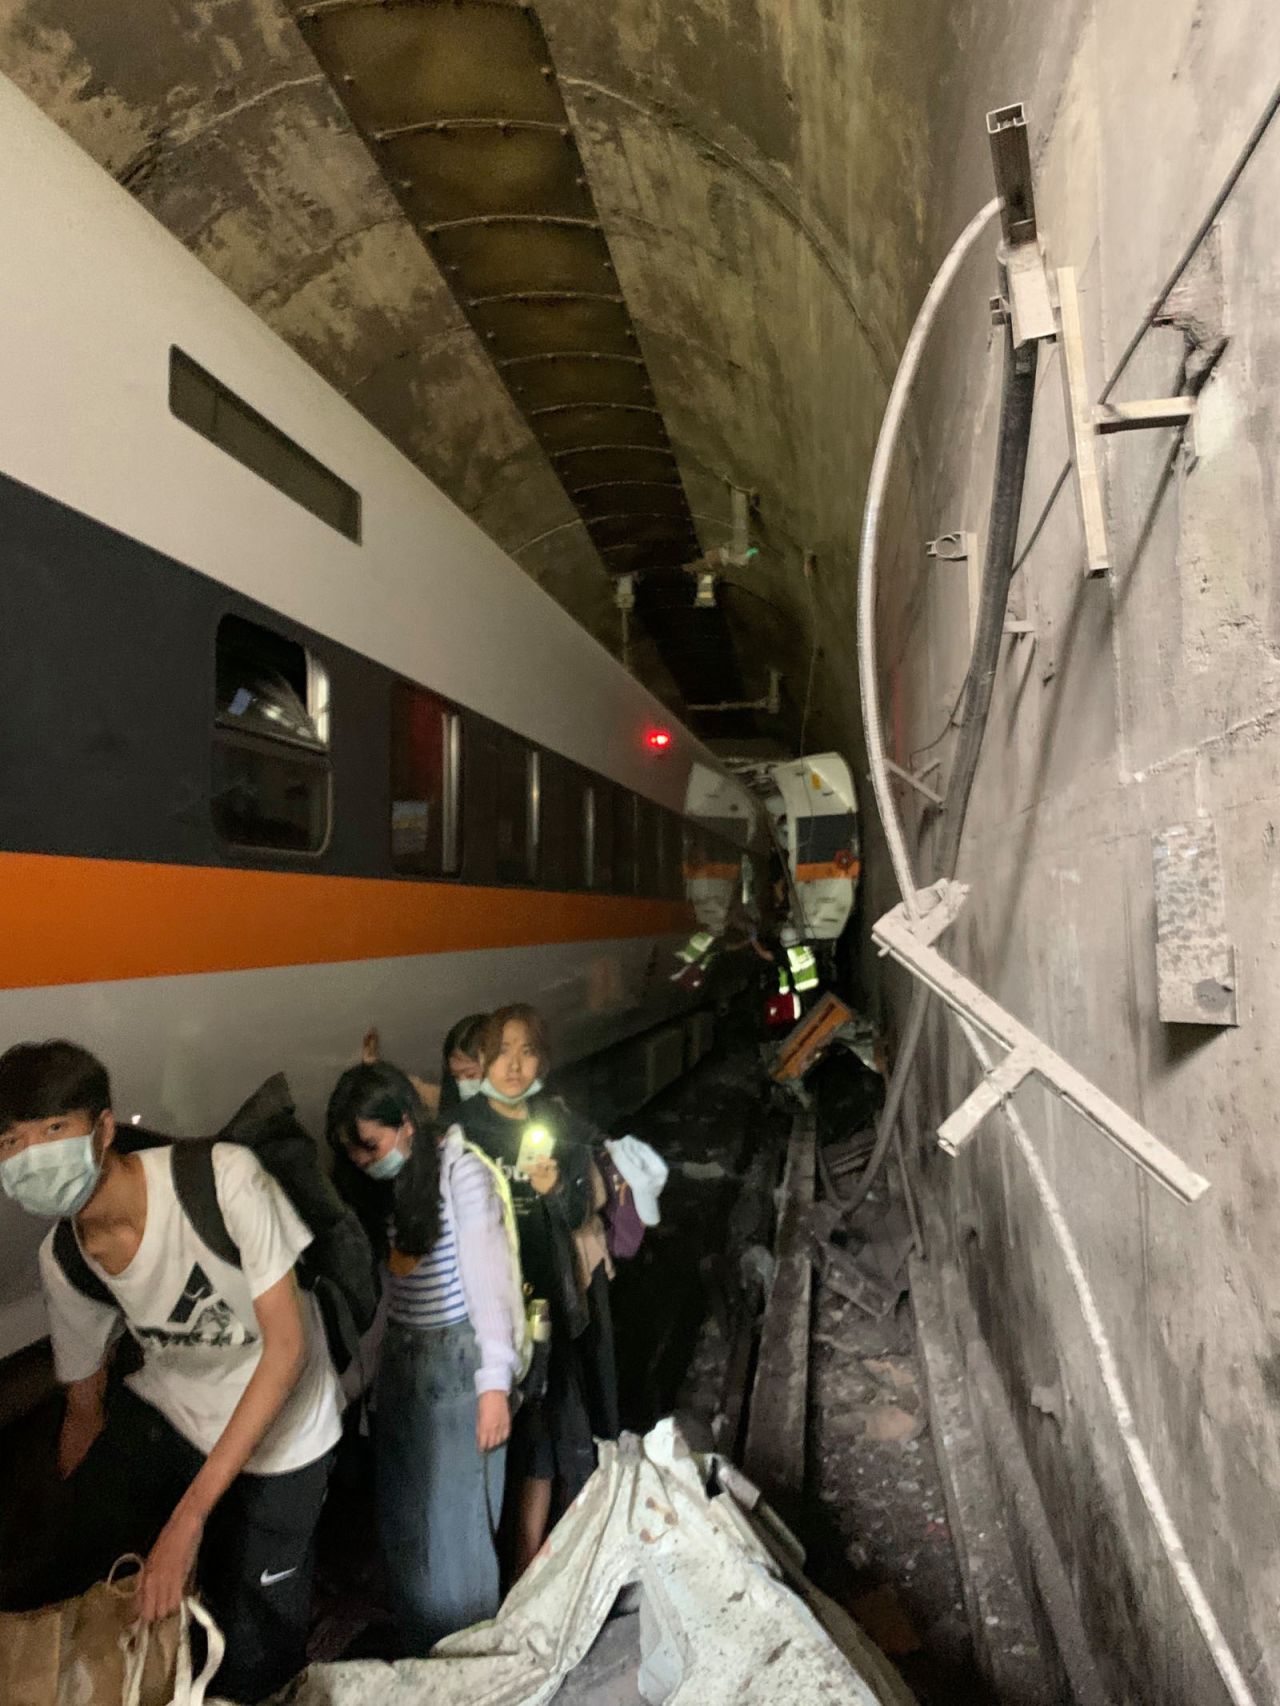 Passengers make their way out of the tunnel where the train derailed.